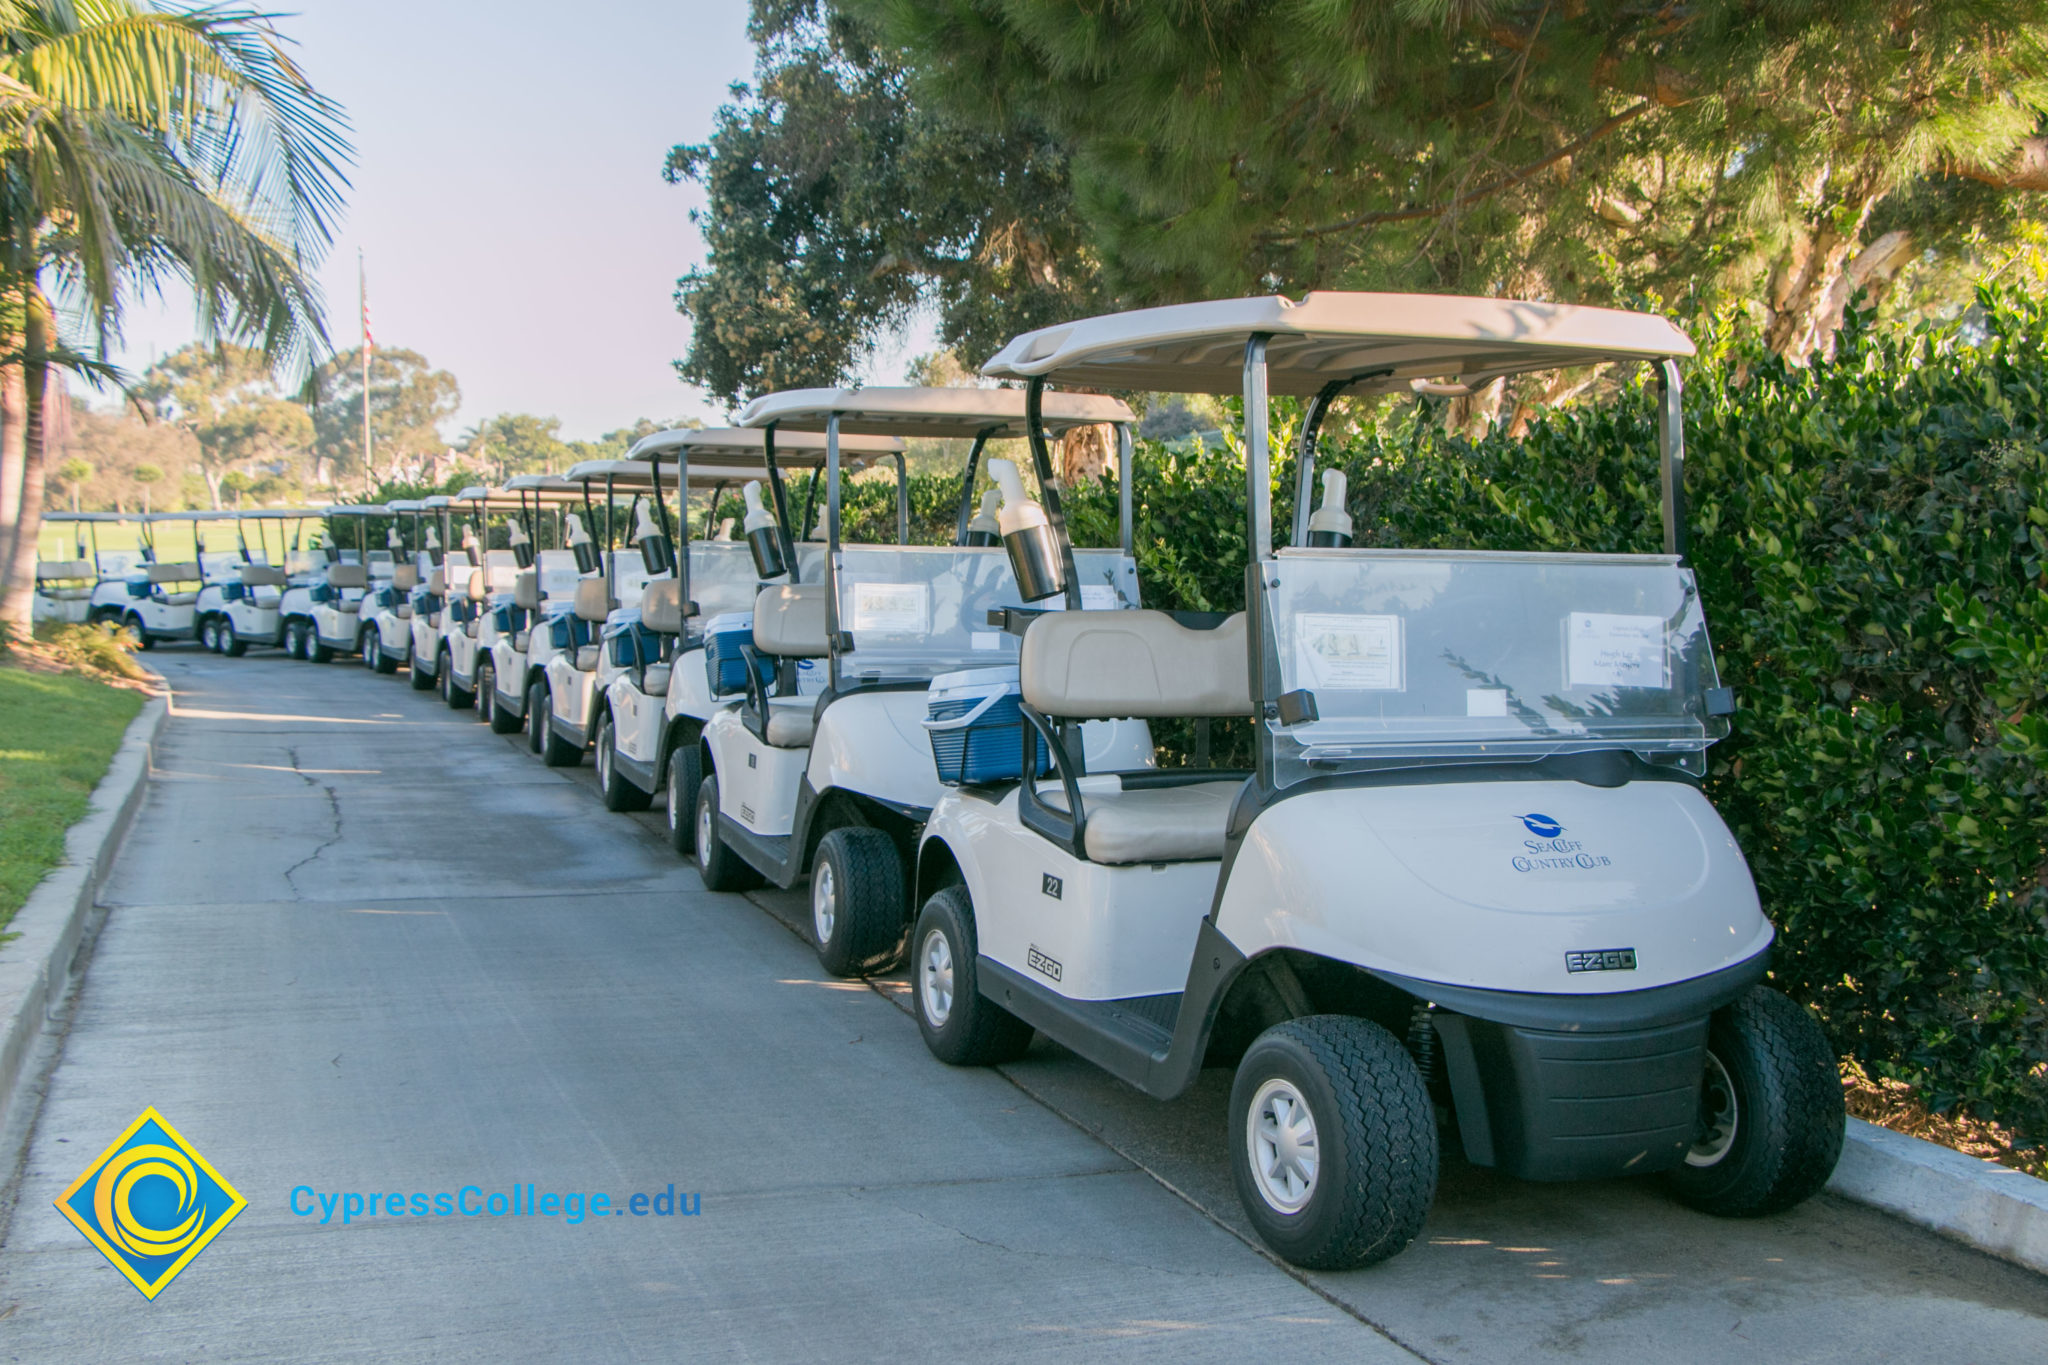 Golf carts lined up.